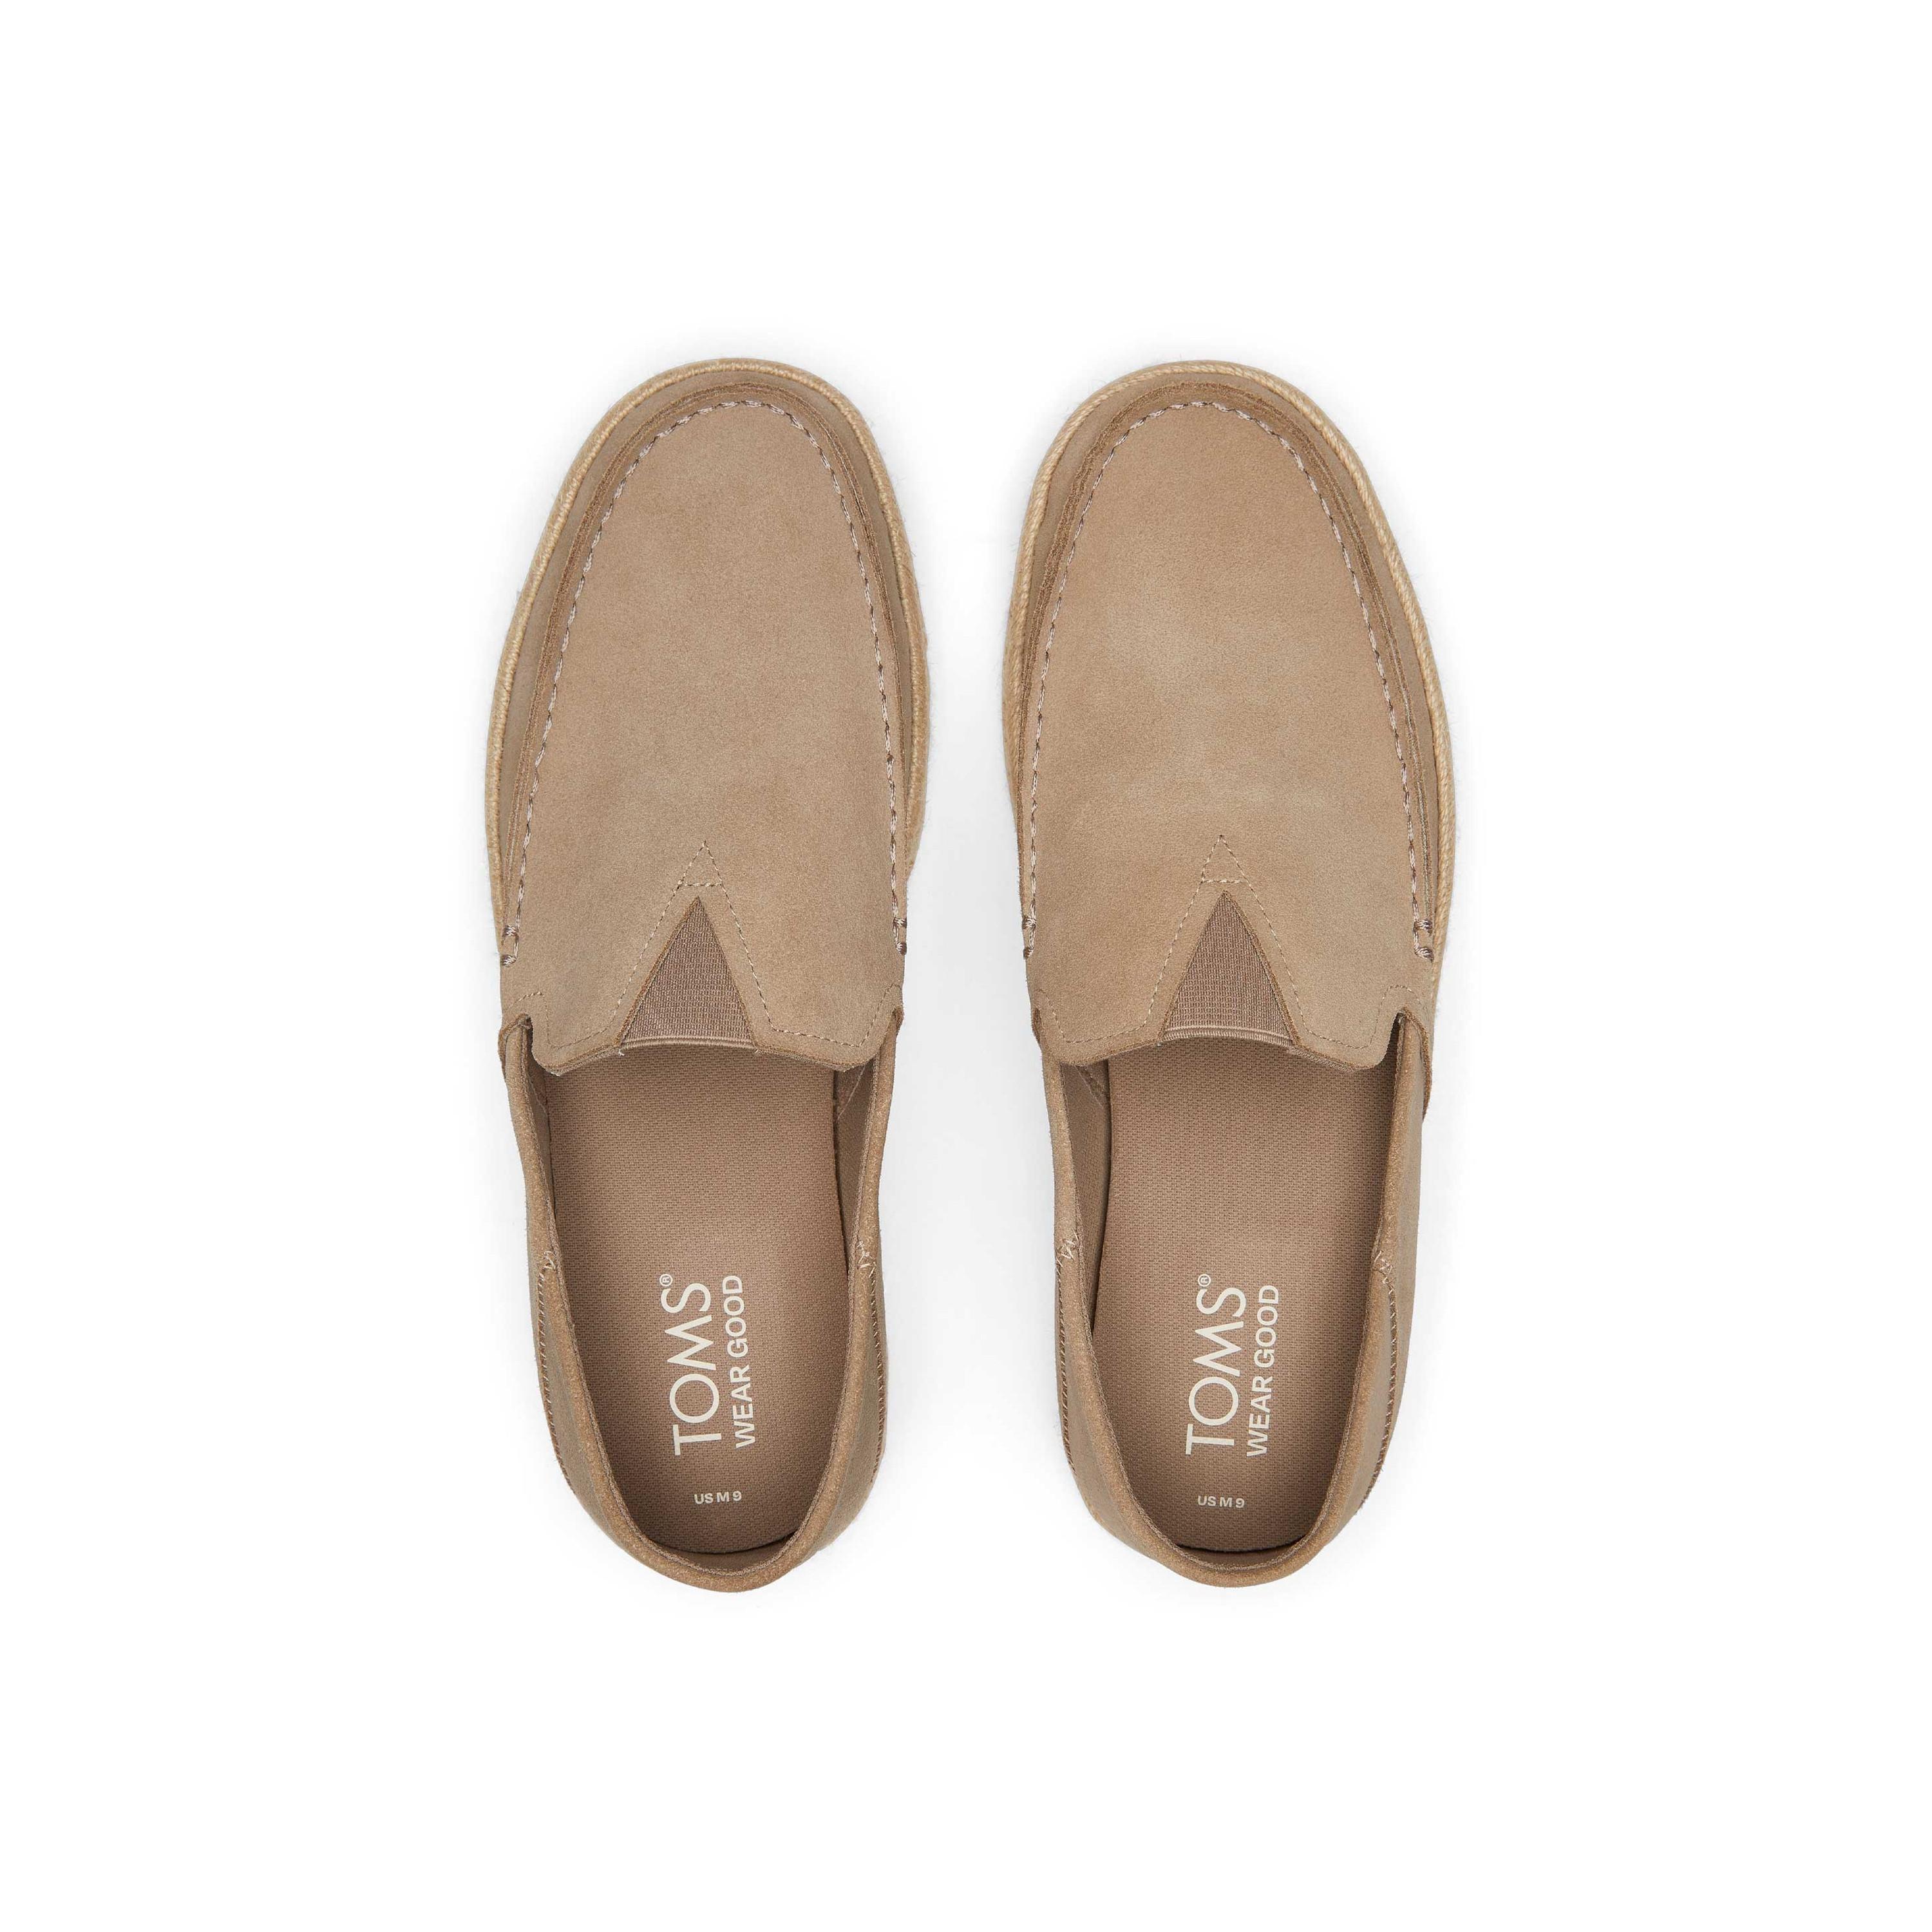 TOMS  espadrillas alonso loafer rope 